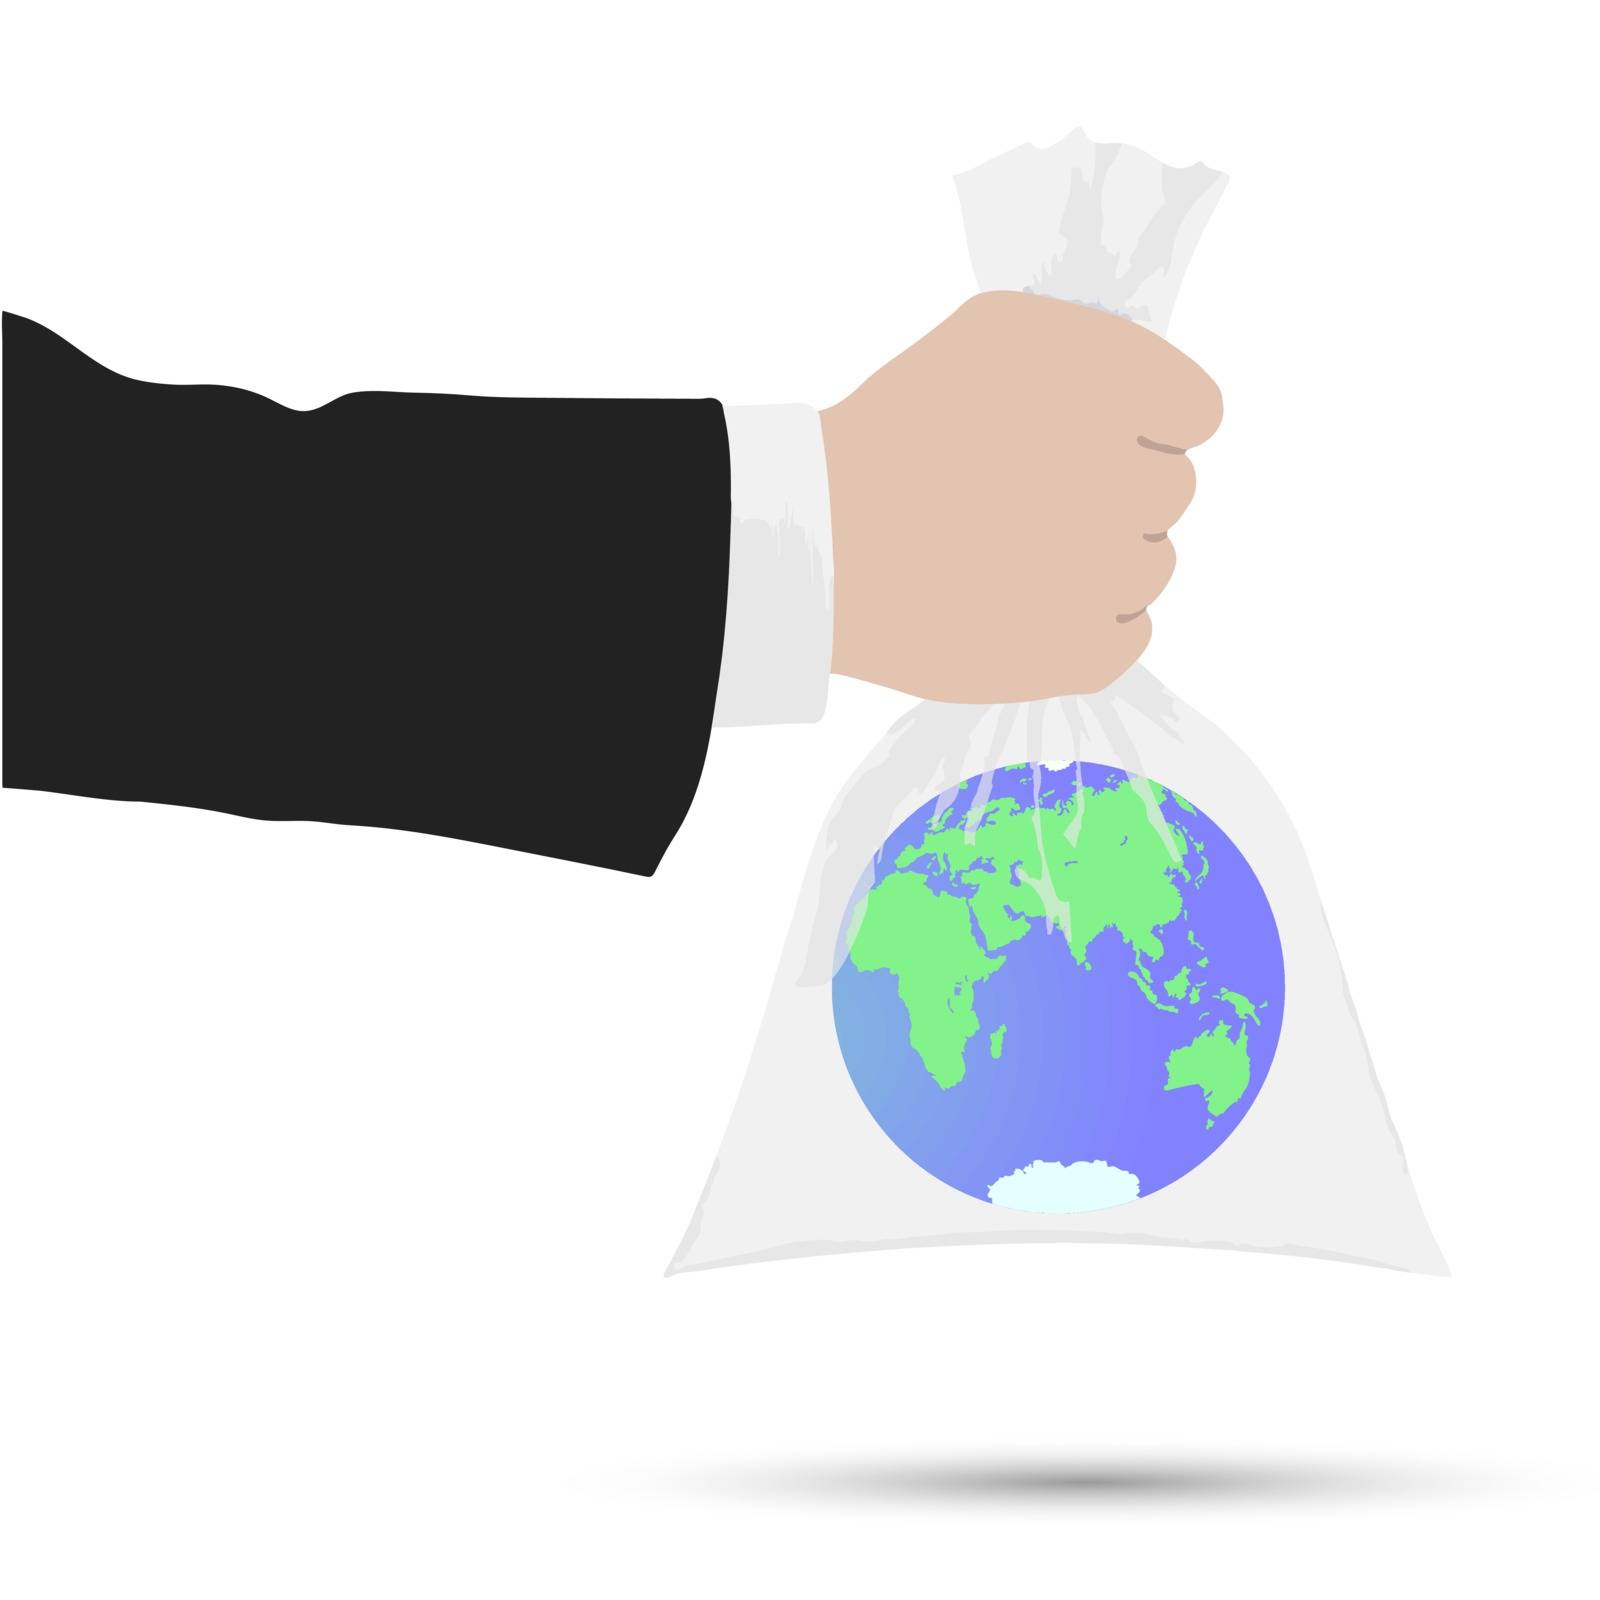 Hand holding a plastic bag. The globe is inside the plastic bag. Environmental protection. Do not use plastic, protect the planet.